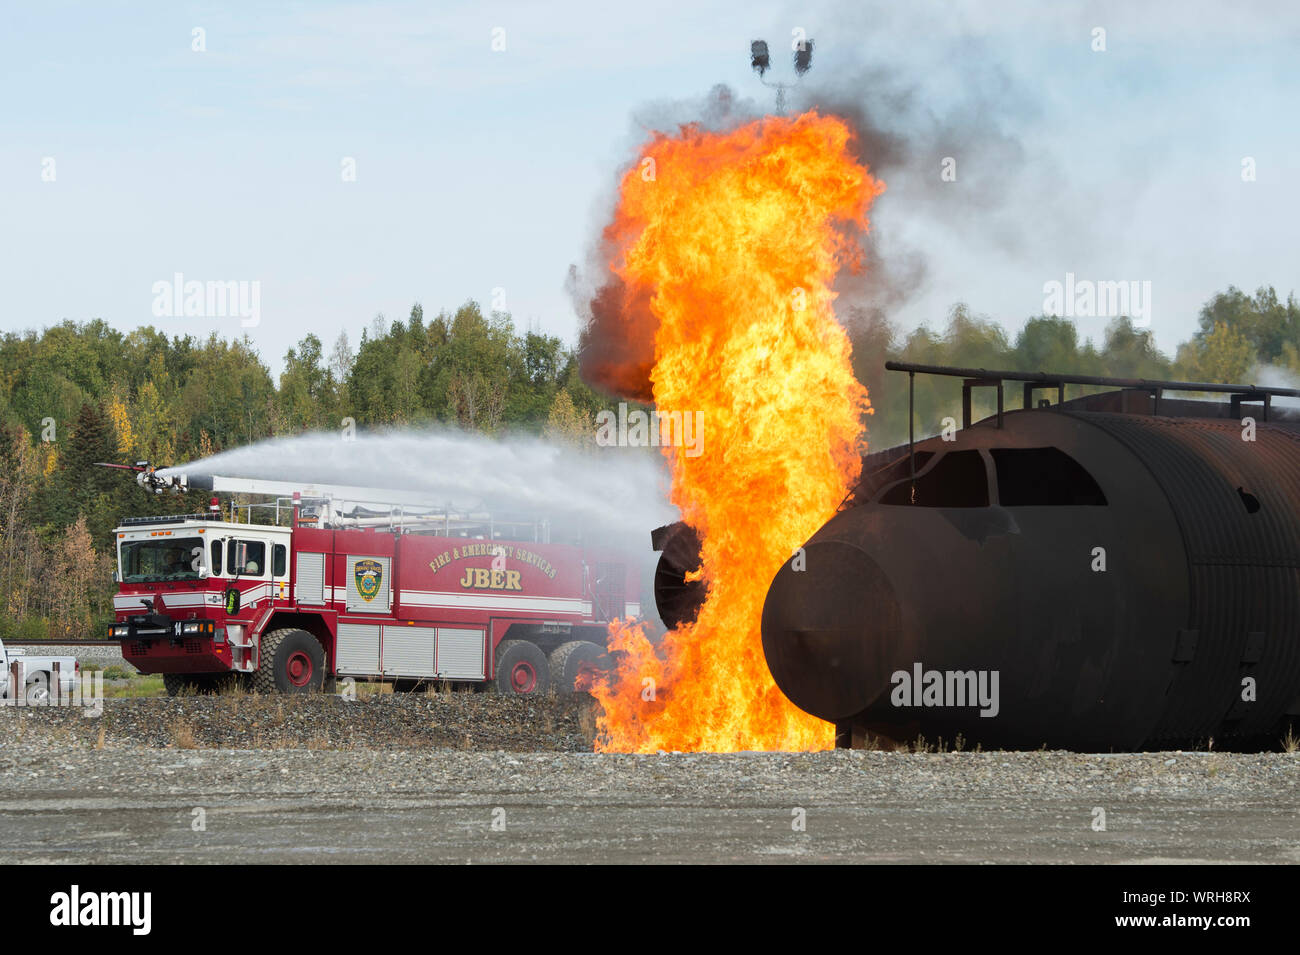 U.S. Air Force fire protection specialists with the 673d Civil Engineer Squadron spray water on a simulated aircraft fire during a fire protection capabilities demonstration at JBER, Alaska, Sept. 6, 2019. Col. Patricia Csànk and Command Chief Master Sgt. Lee Mills, the JBER and 673d Air Base Wing commander and senior enlisted leader, respectively, participated in the demonstration to better understand the physical demands, gear requirements and conditions that might be encountered in an emergency situation. During the demonstration, Csànk and Mills donned fire protection gear, scaled a rescue Stock Photo